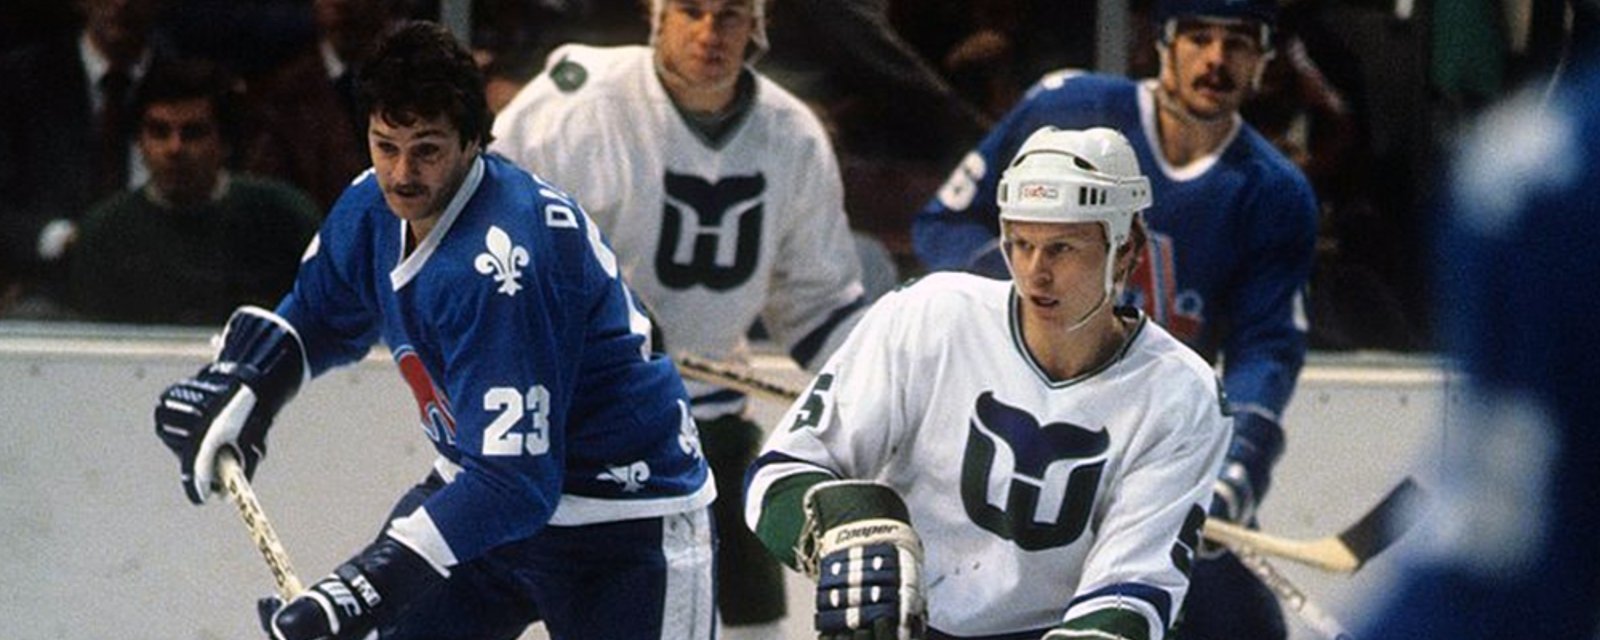 Hurricanes challenge the Avalanche to a retro Whalers vs Nordiques game!